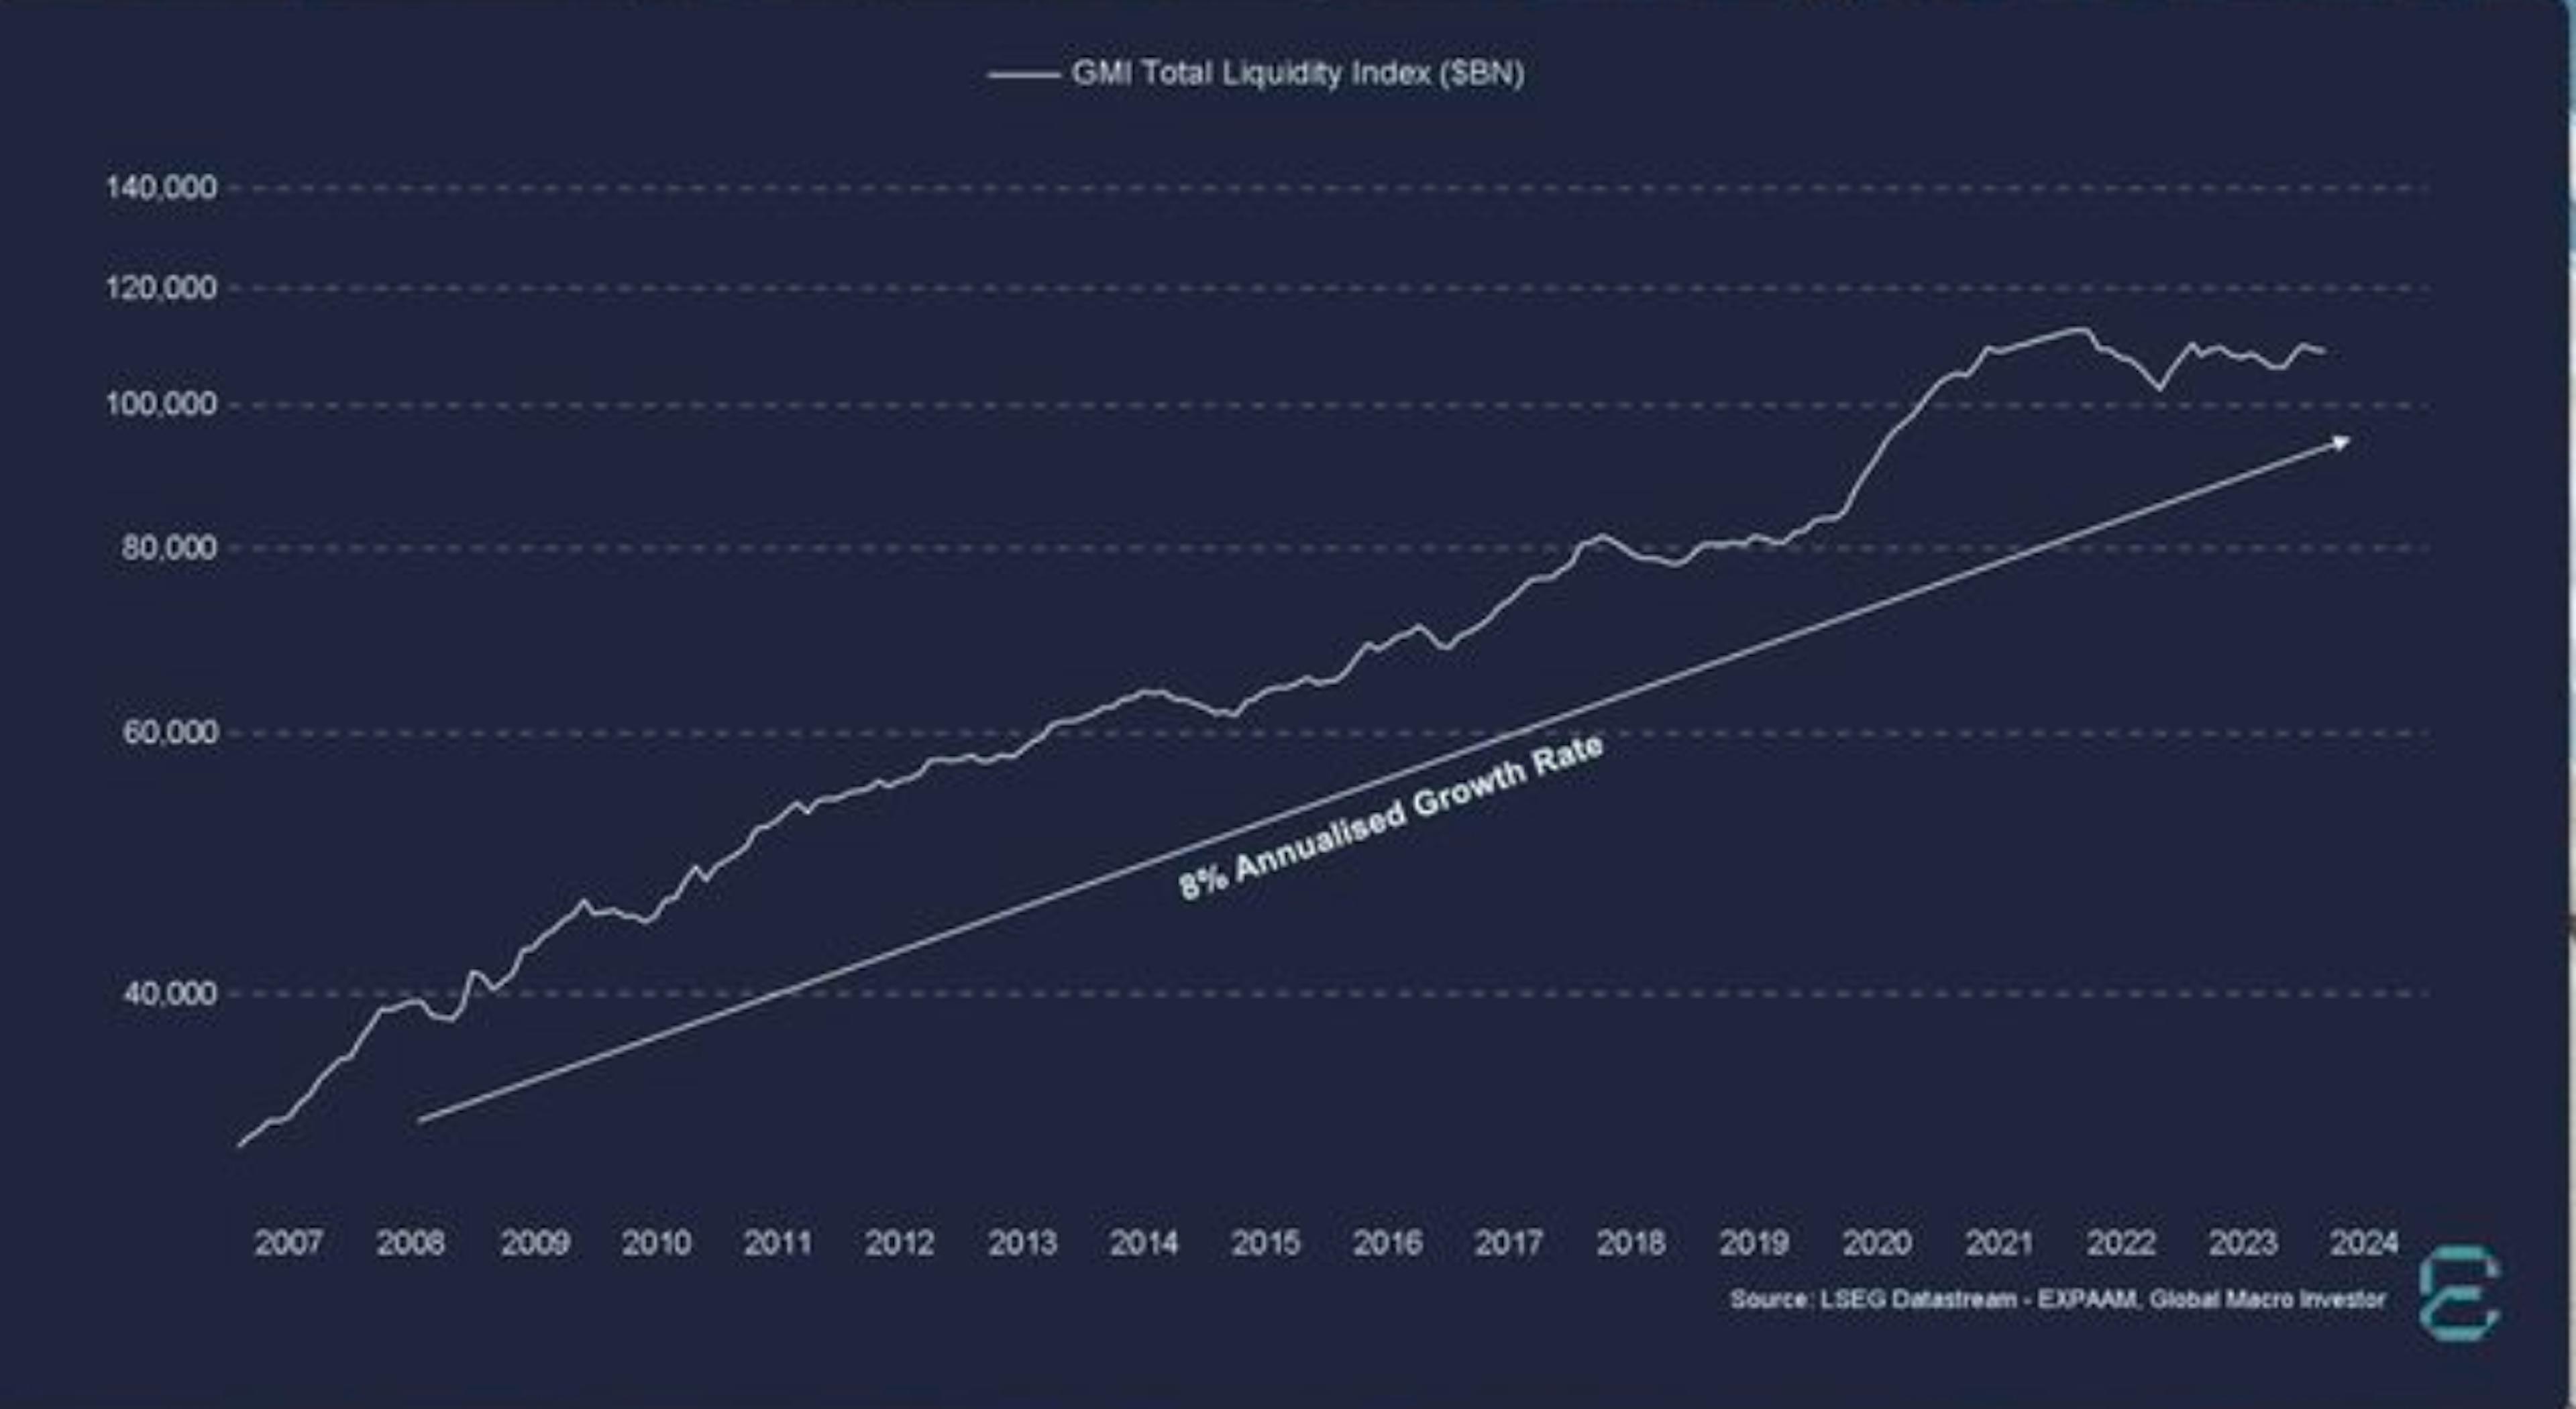 GMI total liquidity index, annualised growth rate